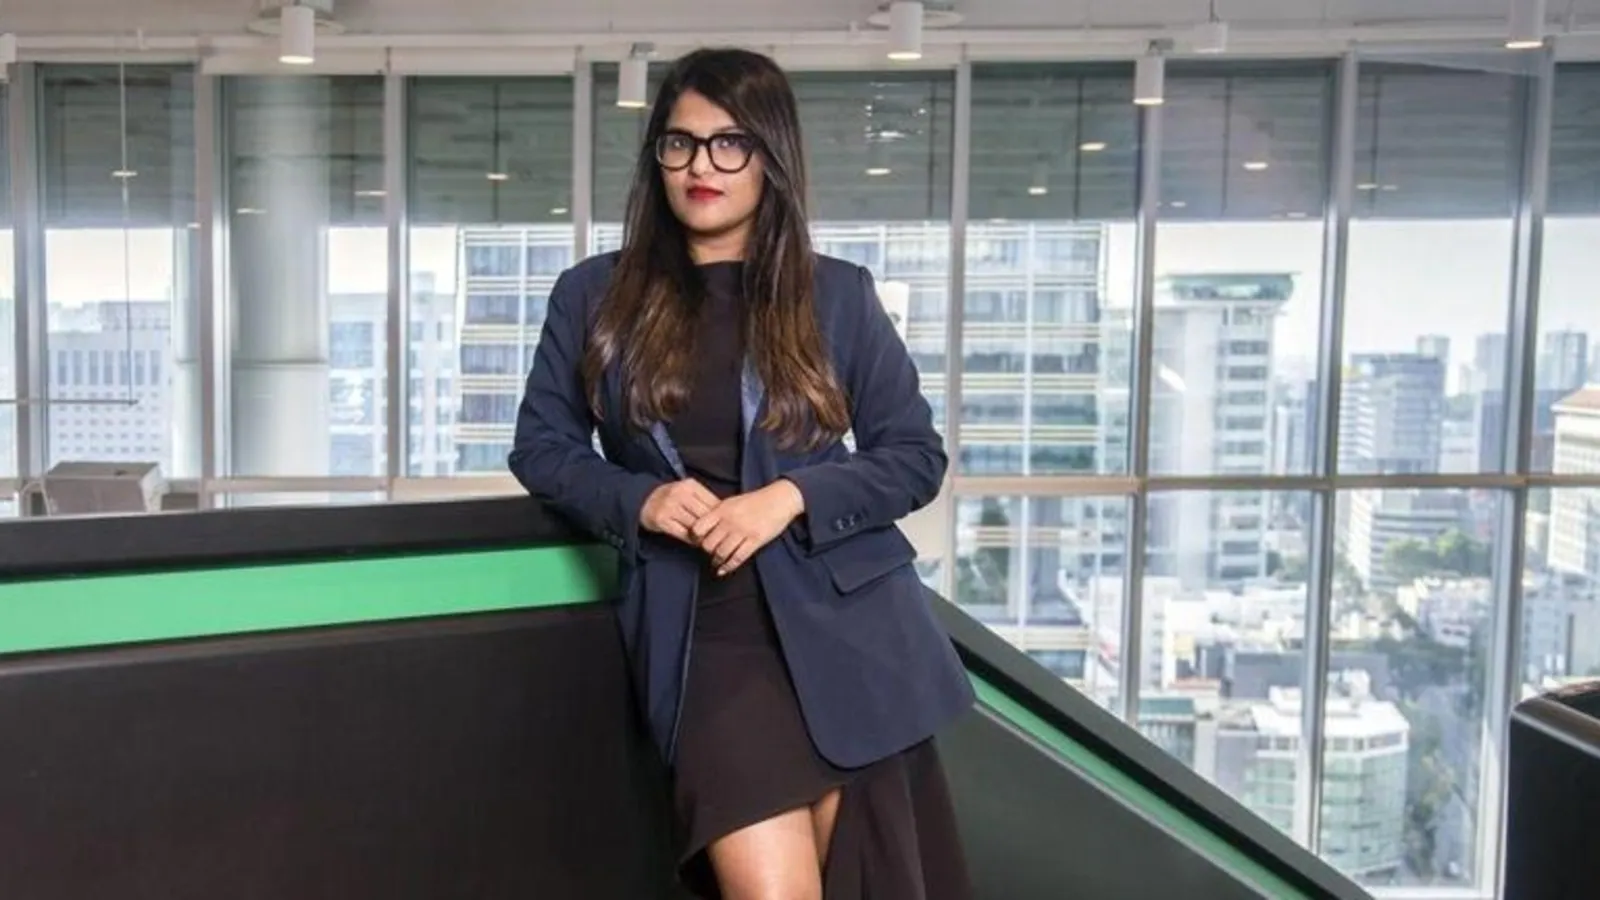 Indian-Origin ex Zilingo CEO Ankiti Bose: ‘Never experienced hate at this scale’